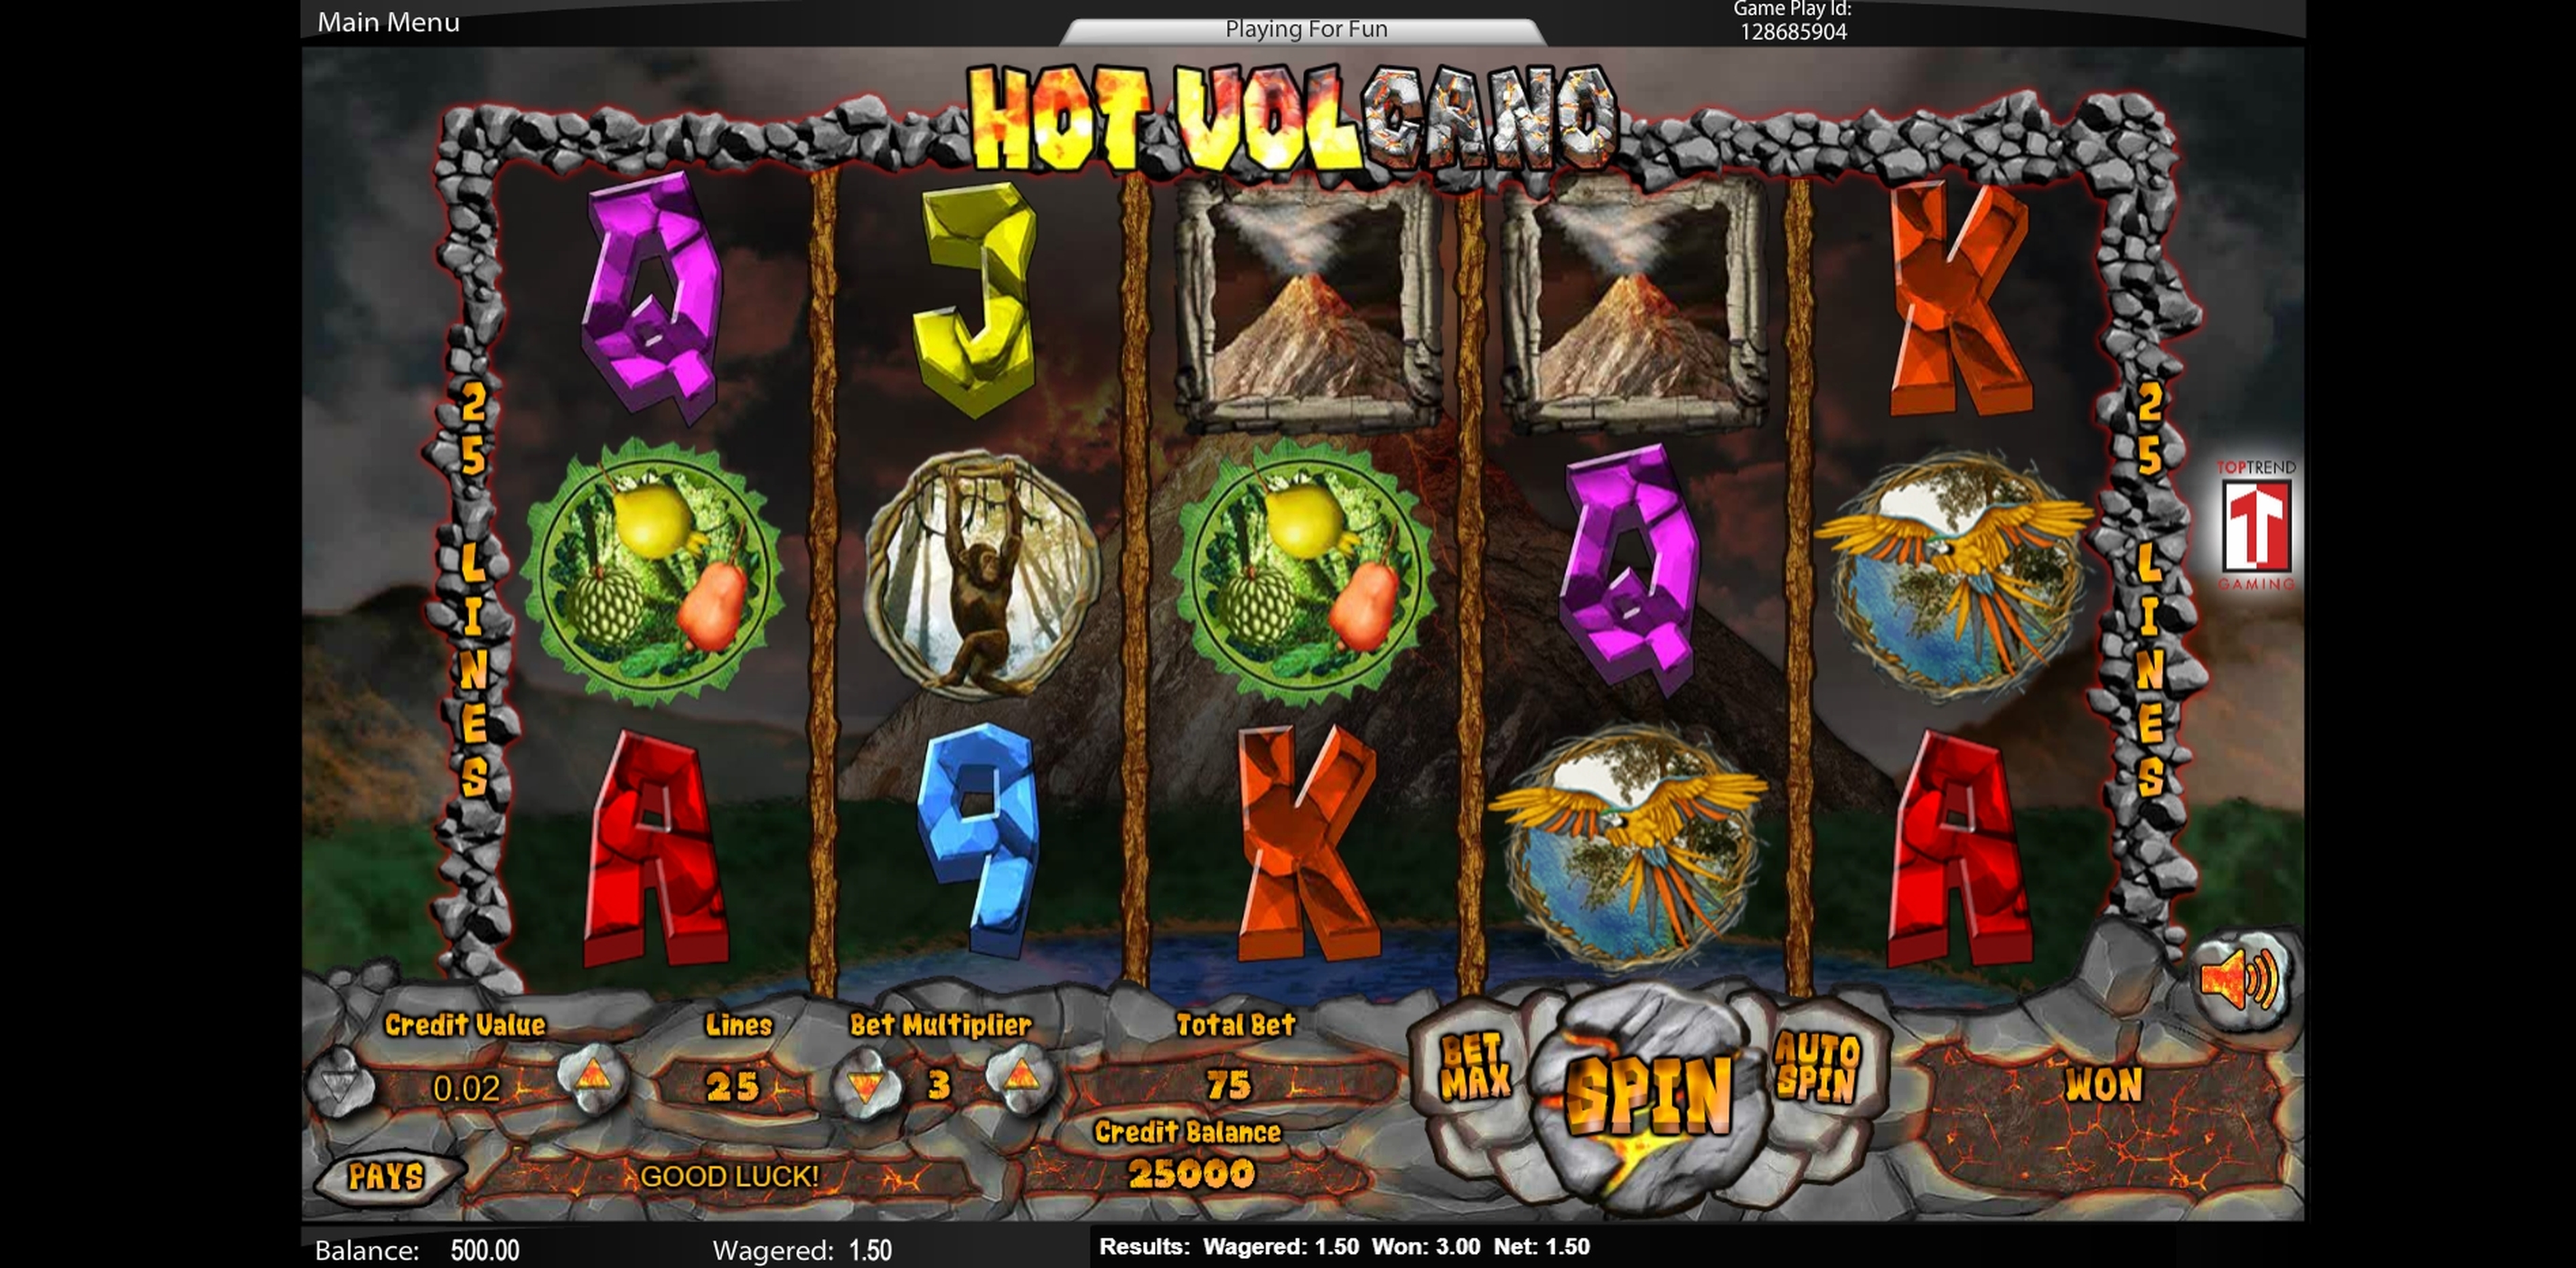 Win Money in Hot Volcano Free Slot Game by Top Trend Gaming